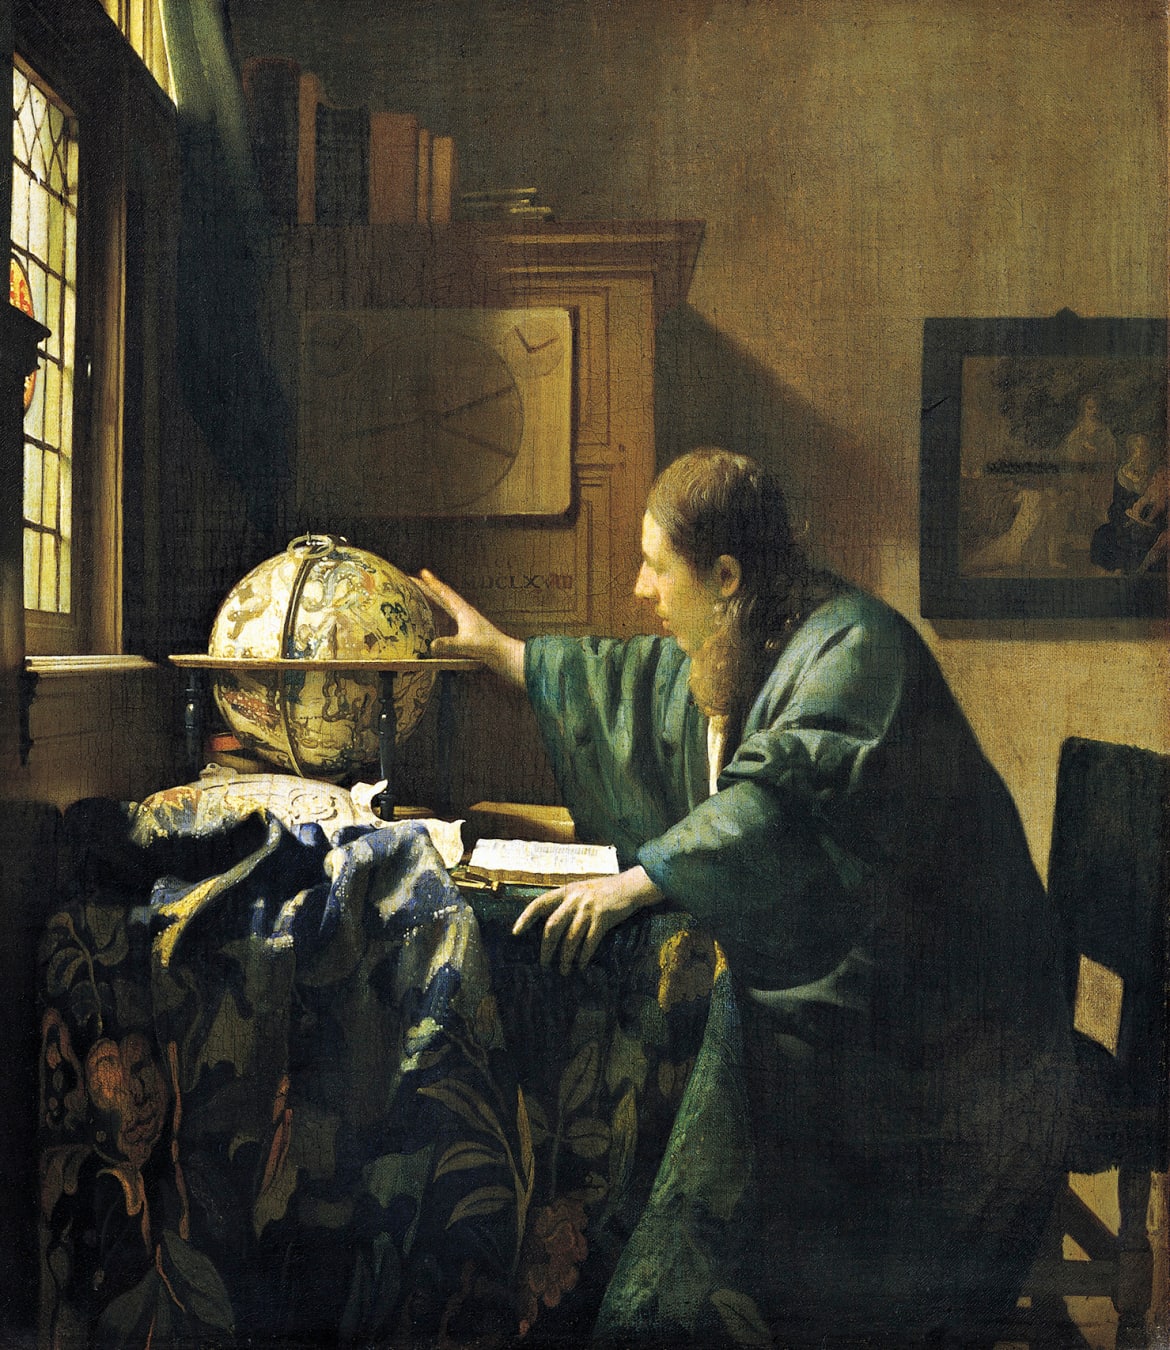  Vermeer's  The Astronomer , one of the most famous paintings destined for Hitler's museum 